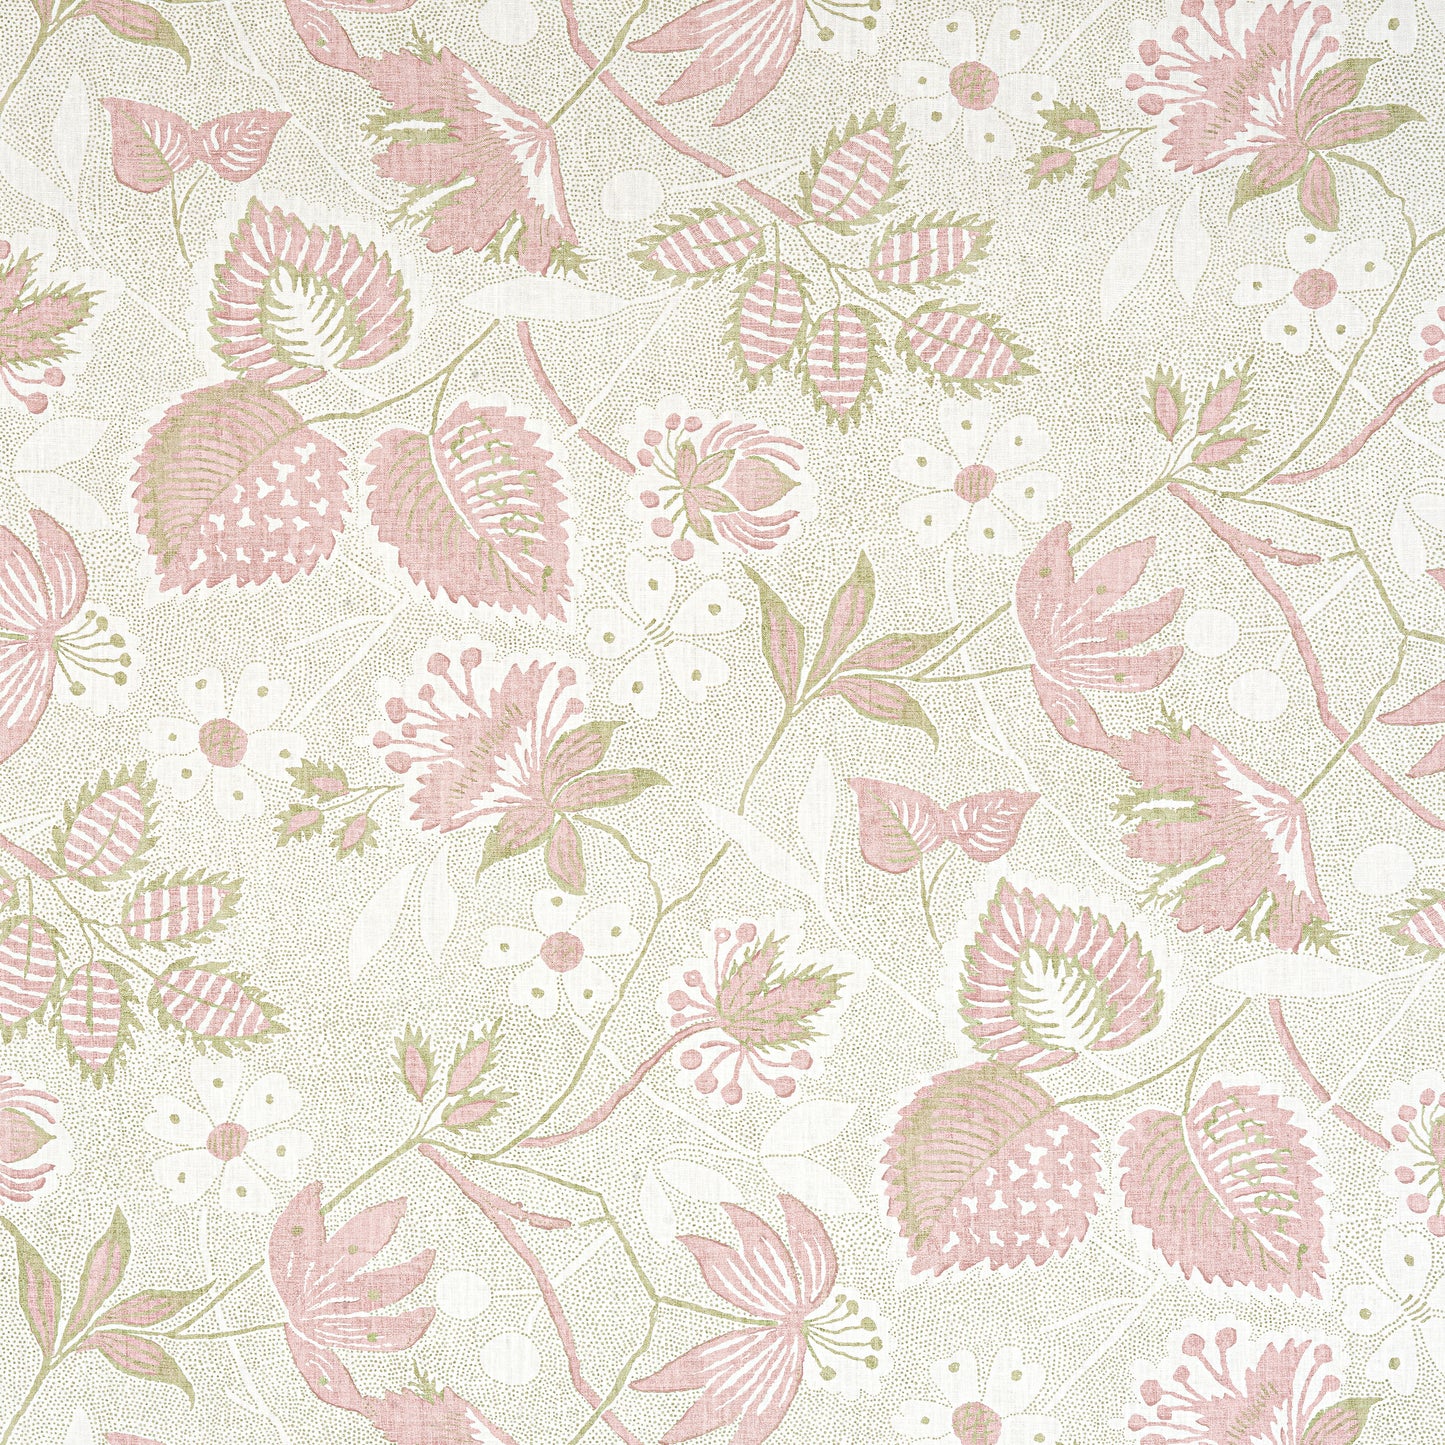 Purchase  Ann French Fabric Pattern number AF15113  pattern name  Indienne Hazel